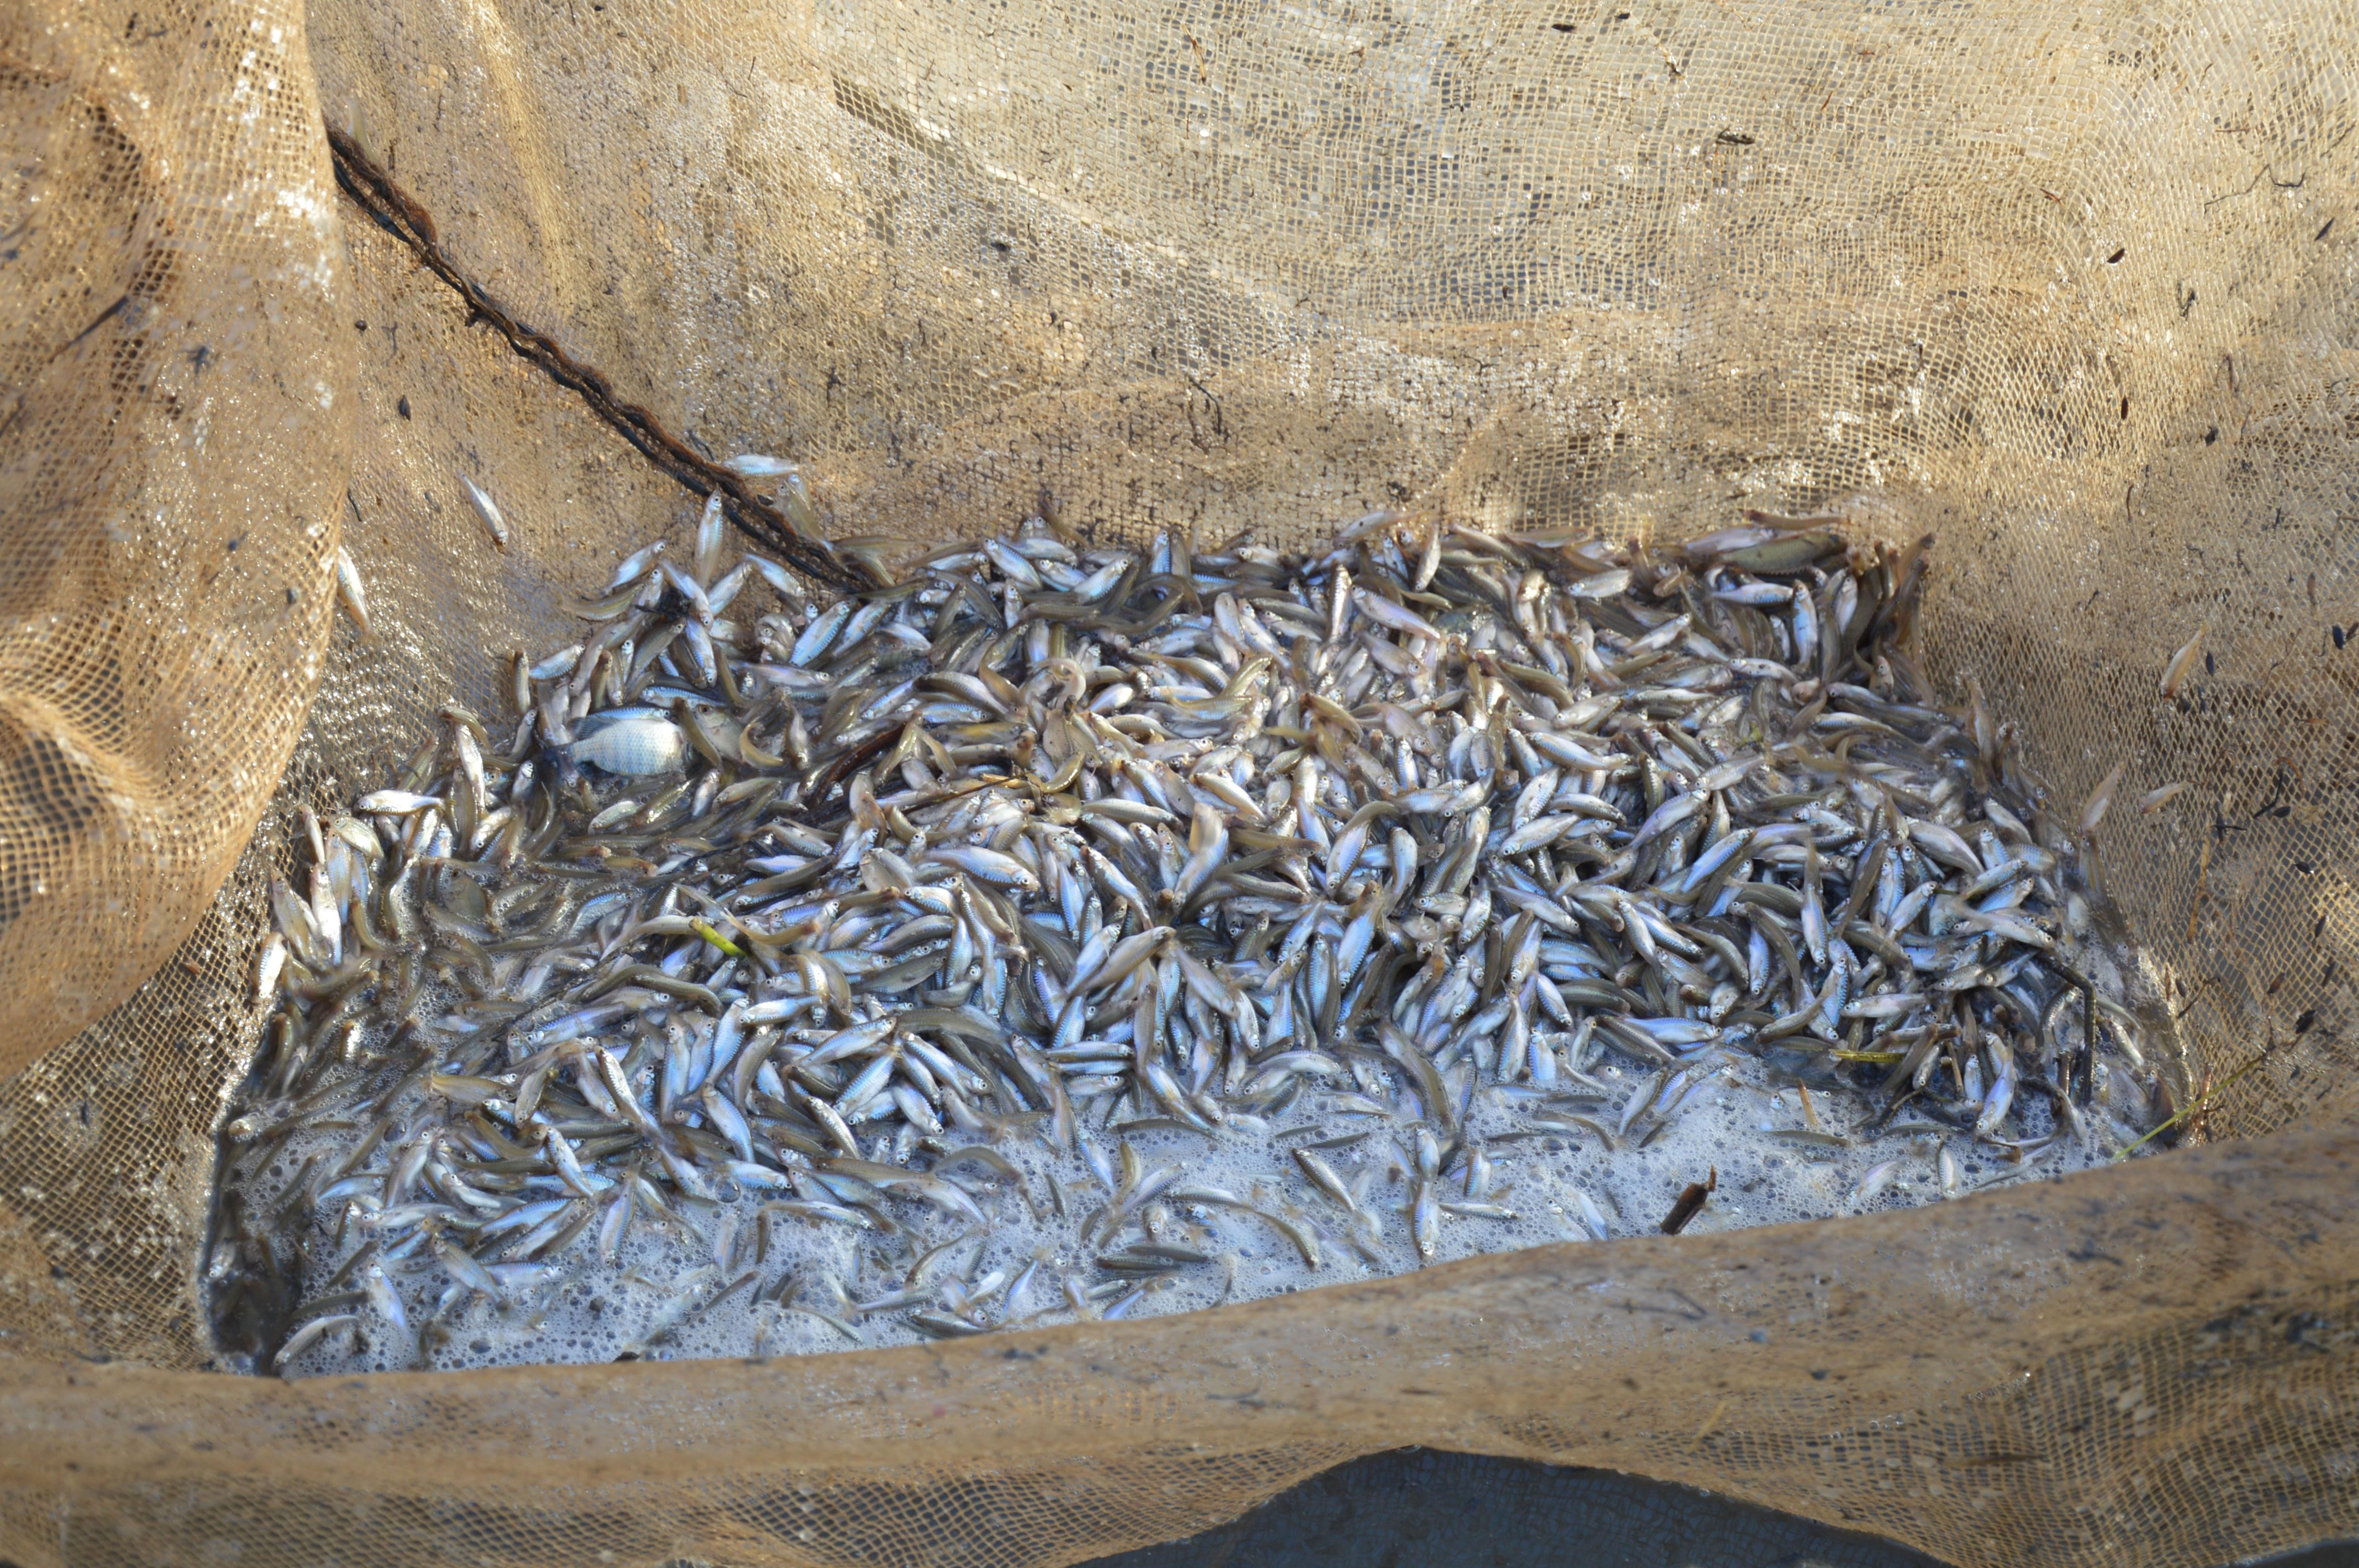 Freshwater fish are running out in An Giang Province.